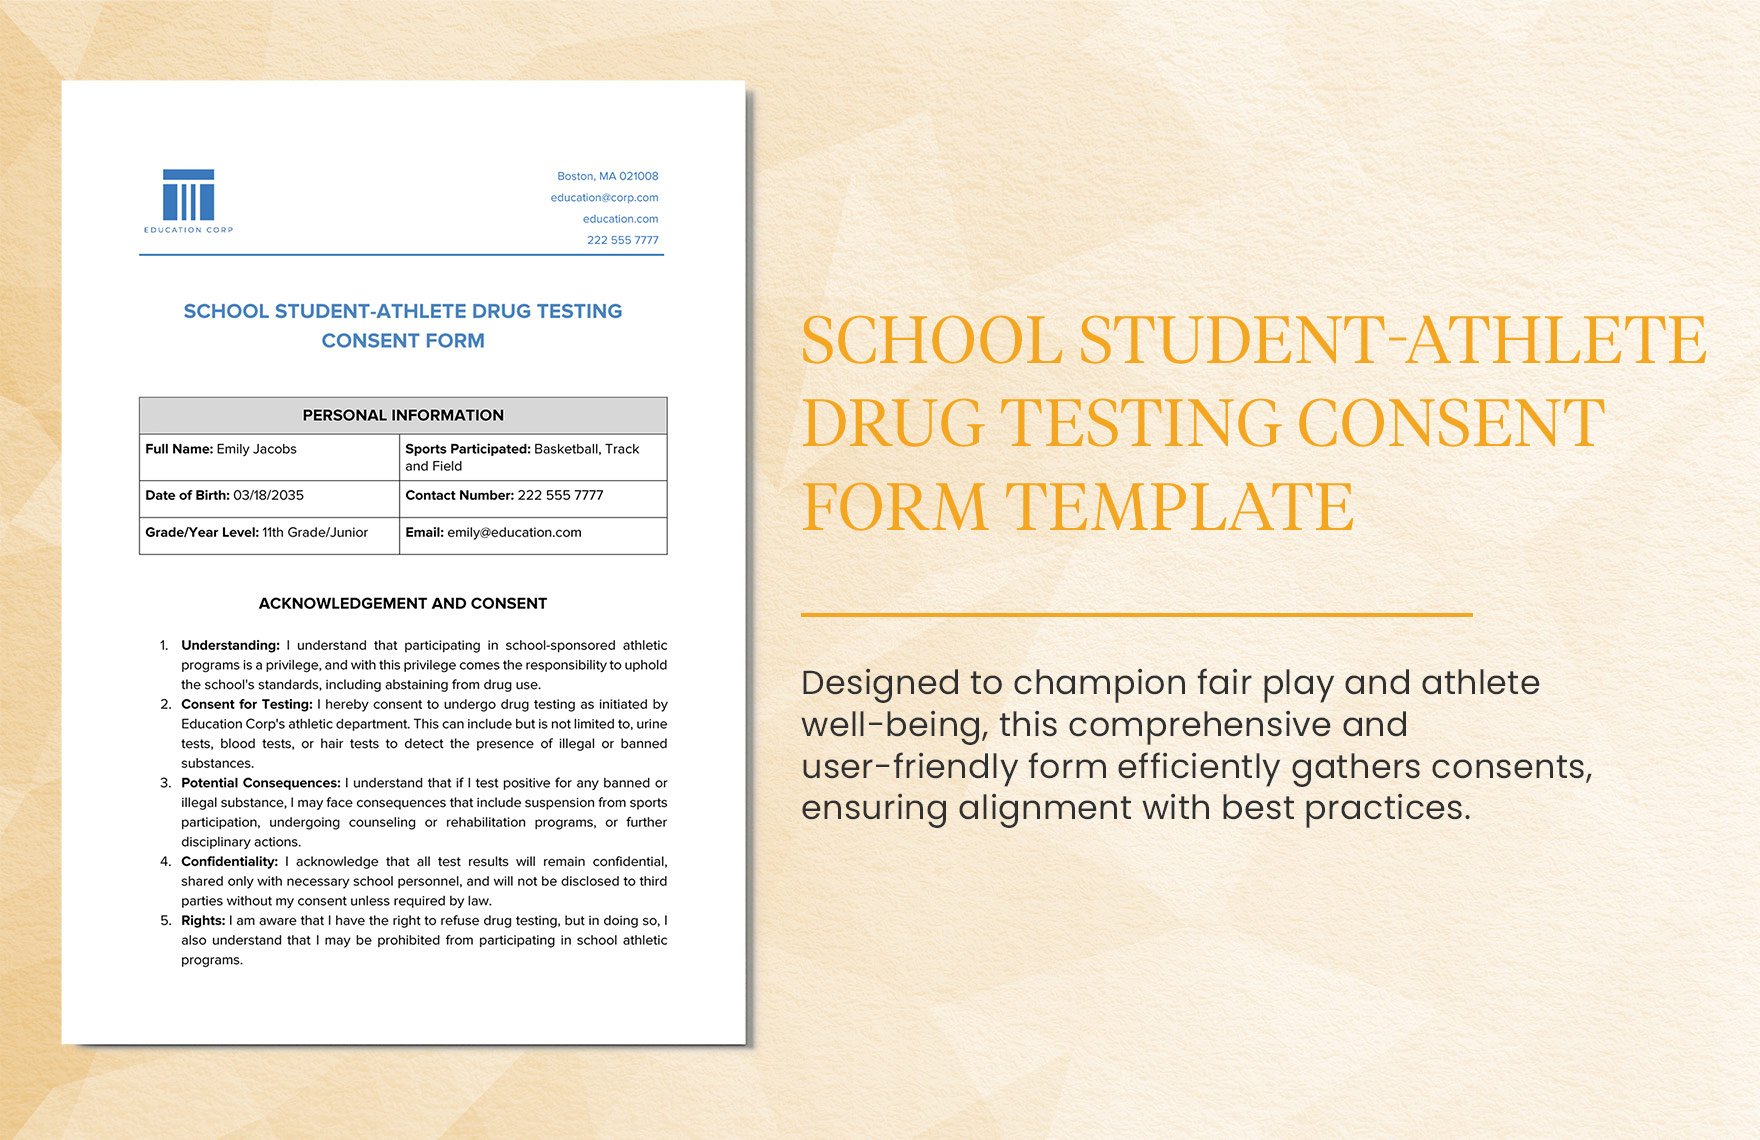 School Student-Athlete Drug Testing Consent Form Template in Word, Google Docs, PDF